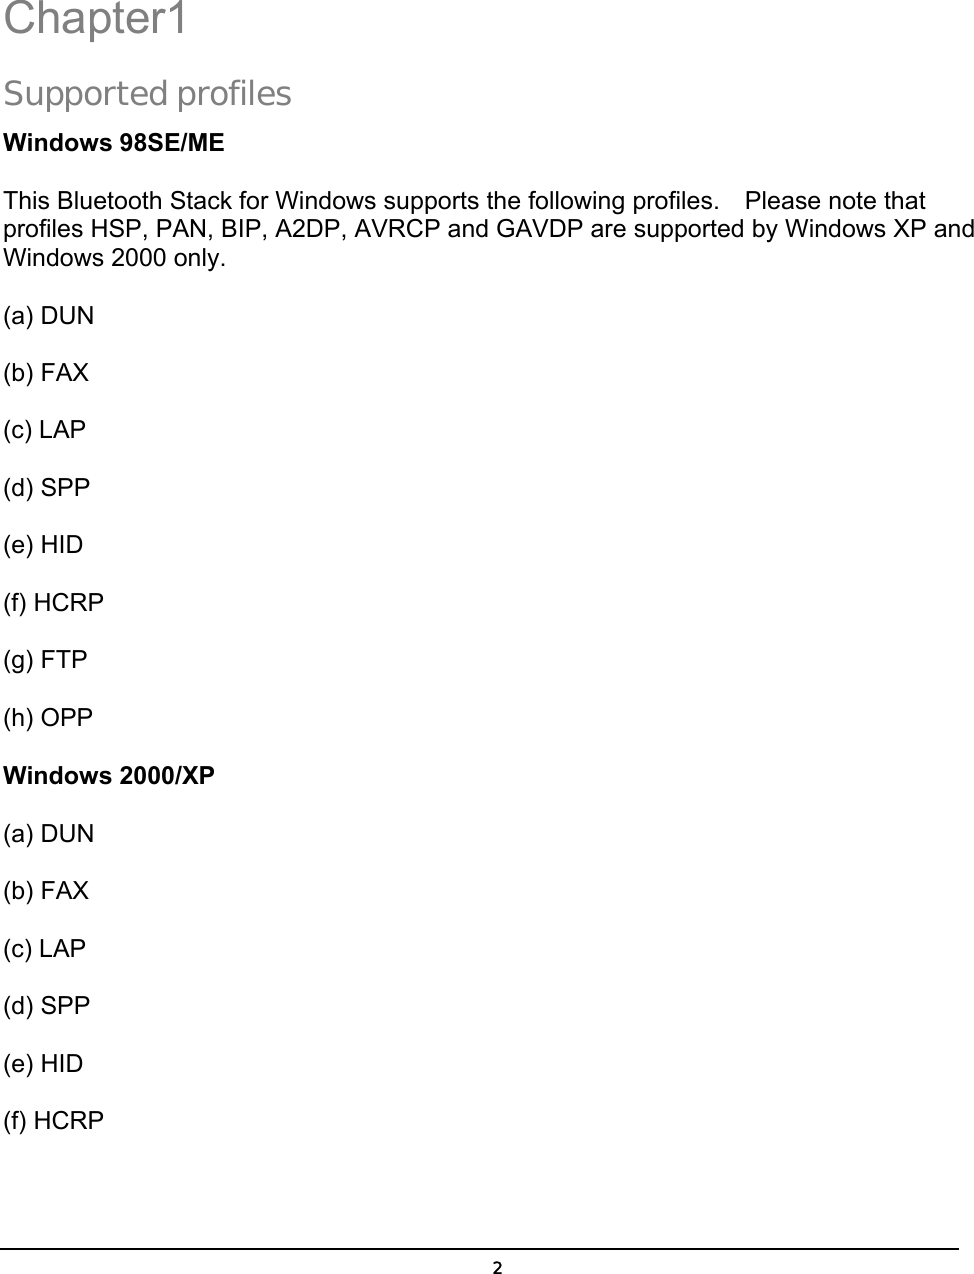   2 1 Chapter1 Supported profiles Windows 98SE/ME This Bluetooth Stack for Windows supports the following profiles.    Please note that profiles HSP, PAN, BIP, A2DP, AVRCP and GAVDP are supported by Windows XP and Windows 2000 only.  (a) DUN  (b) FAX  (c) LAP  (d) SPP  (e) HID  (f) HCRP  (g) FTP  (h) OPP Windows 2000/XP (a) DUN  (b) FAX  (c) LAP  (d) SPP  (e) HID  (f) HCRP  